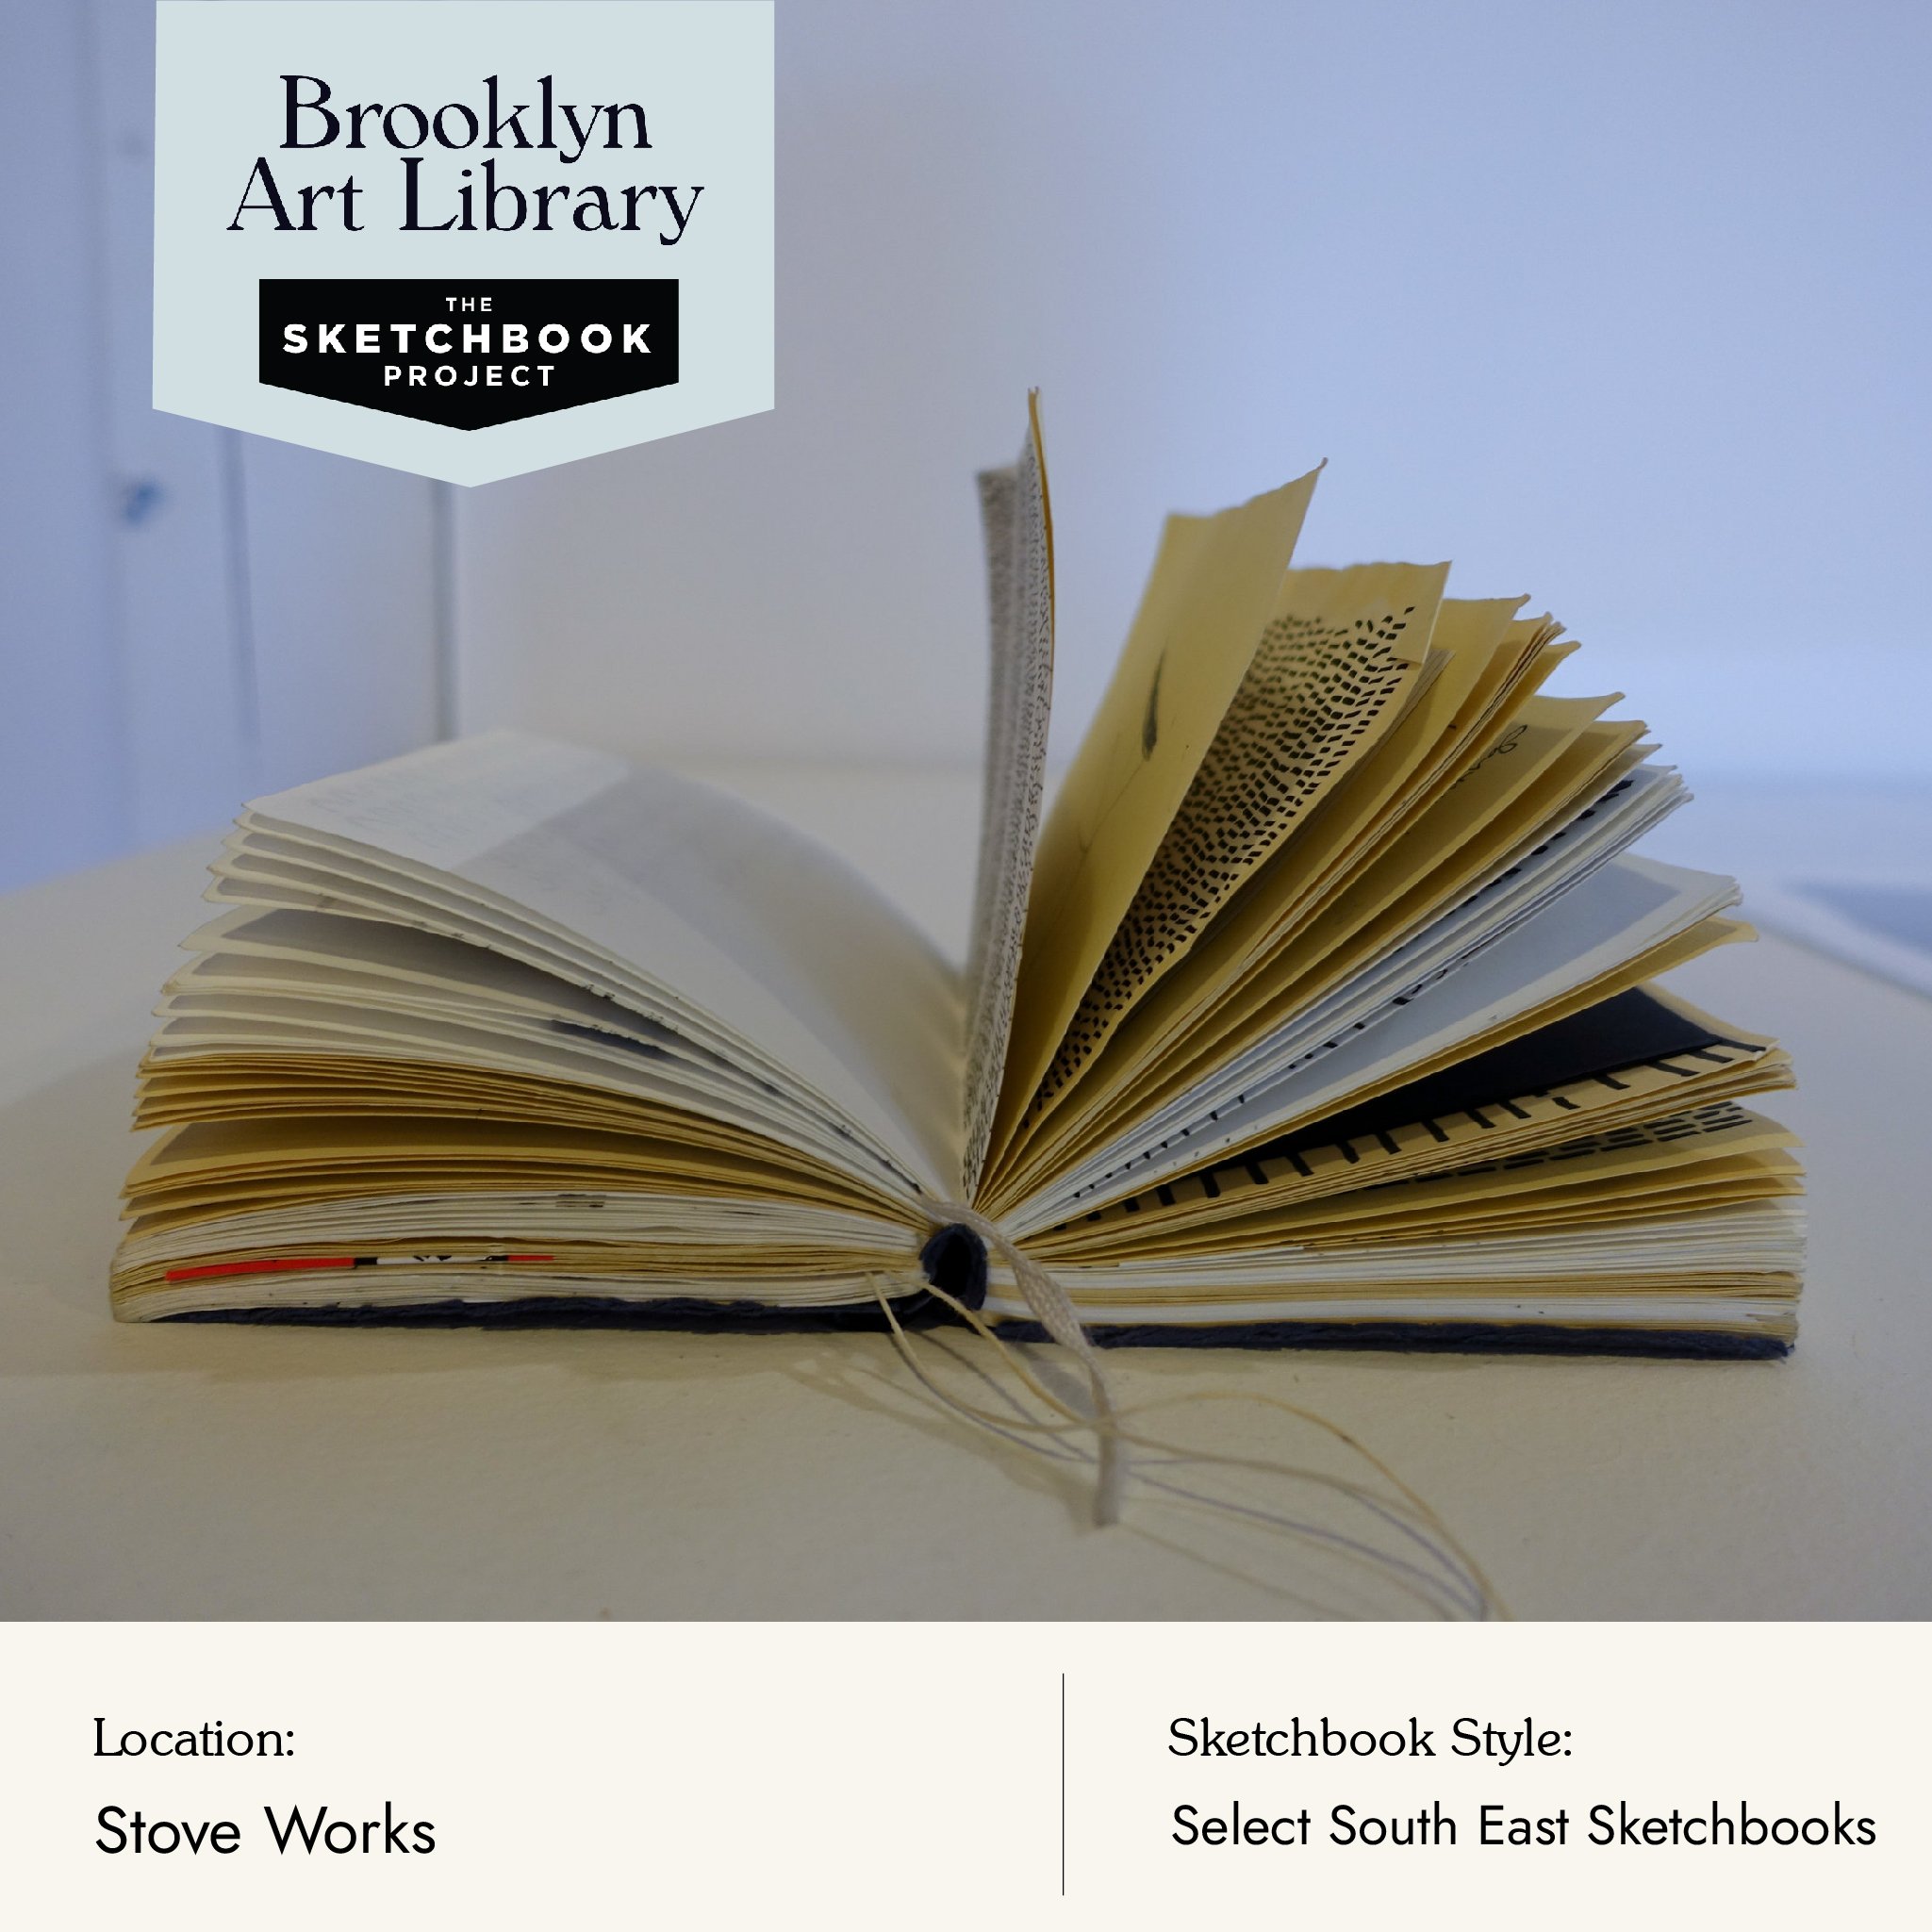 Brooklyn Art Library / The Sketchbook Project